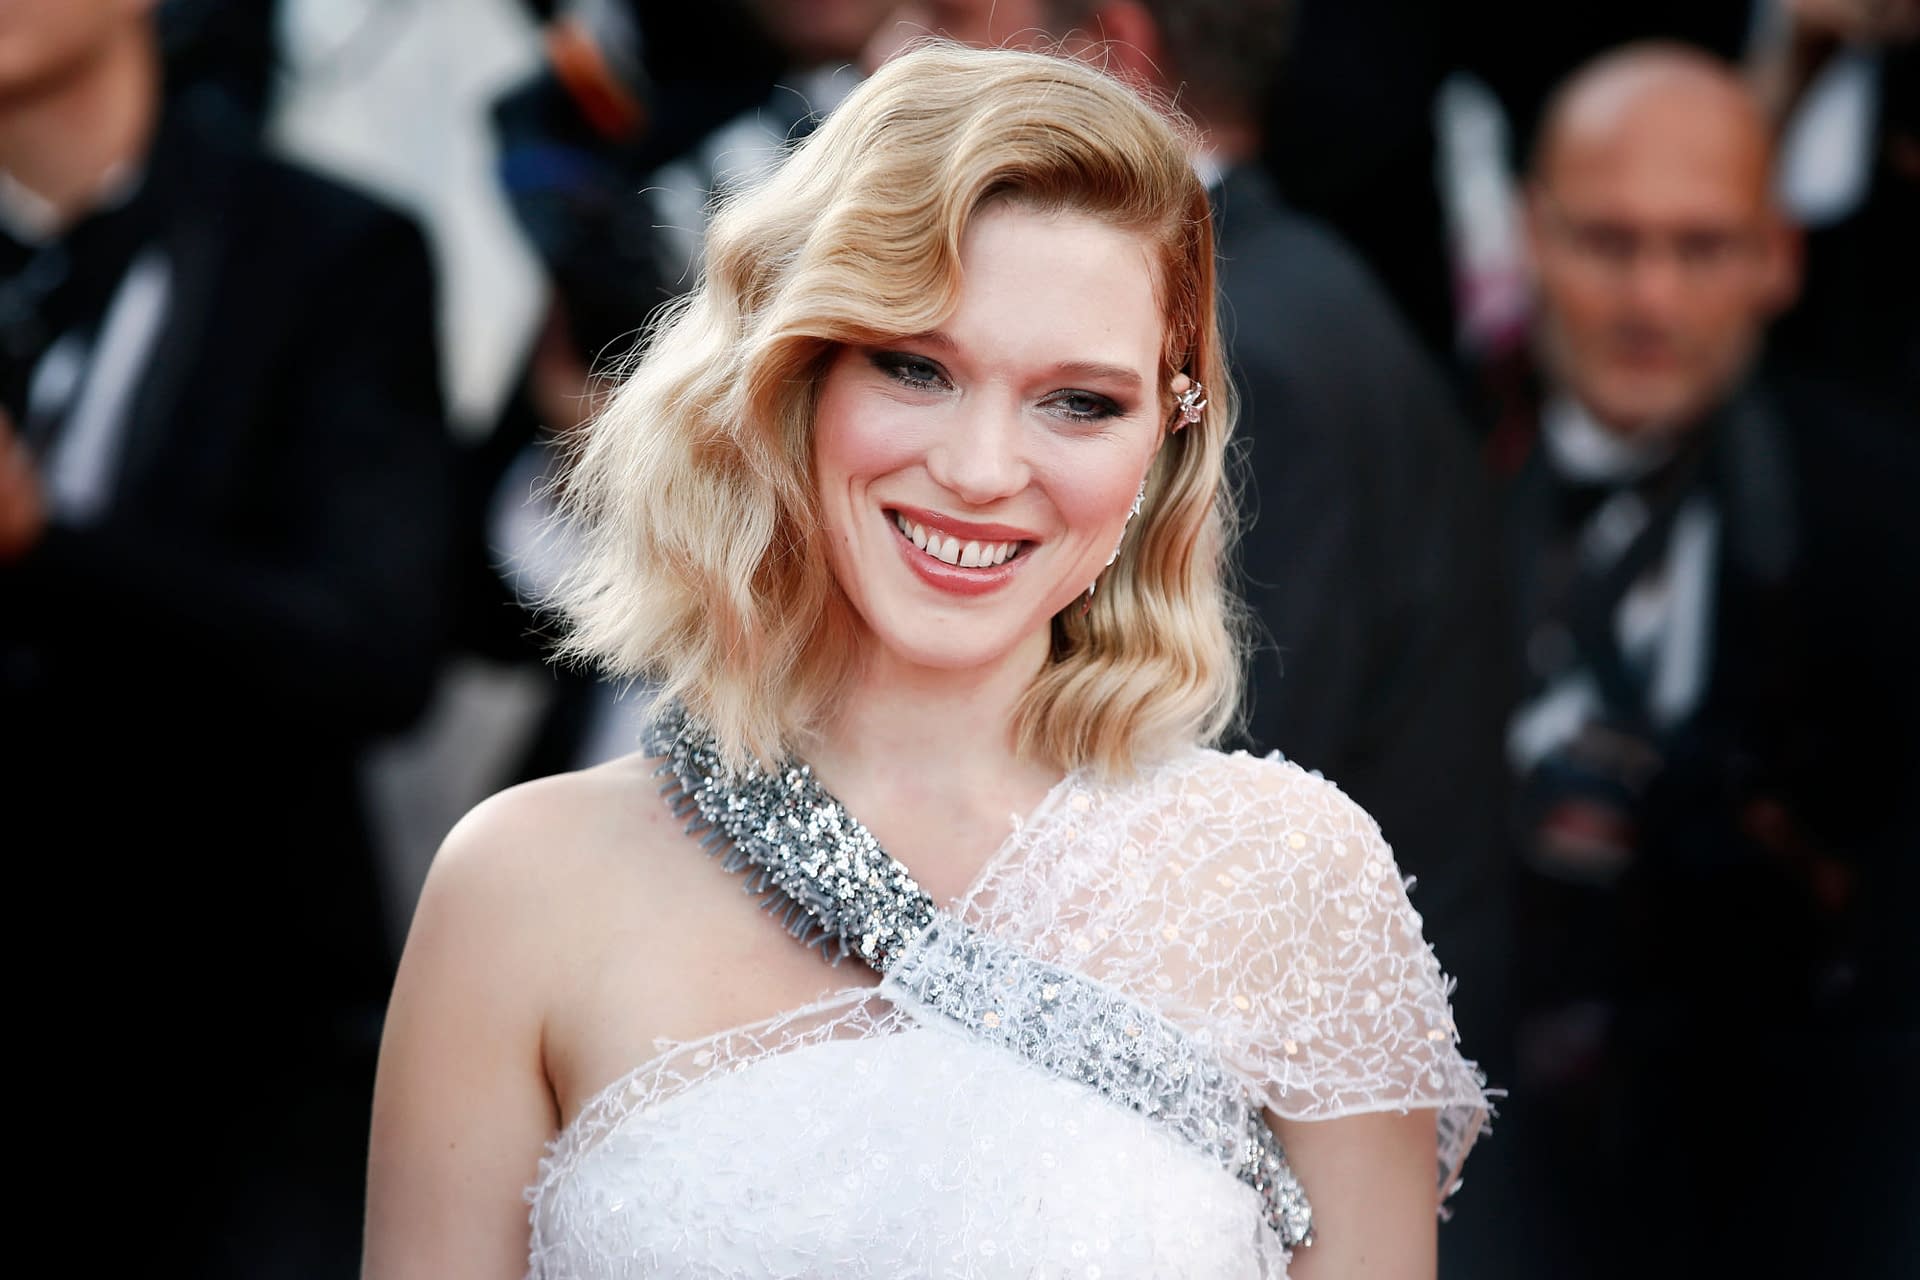 No Time To Die Actress Lea Seydoux: Not Here To Please Bond's Sexuality